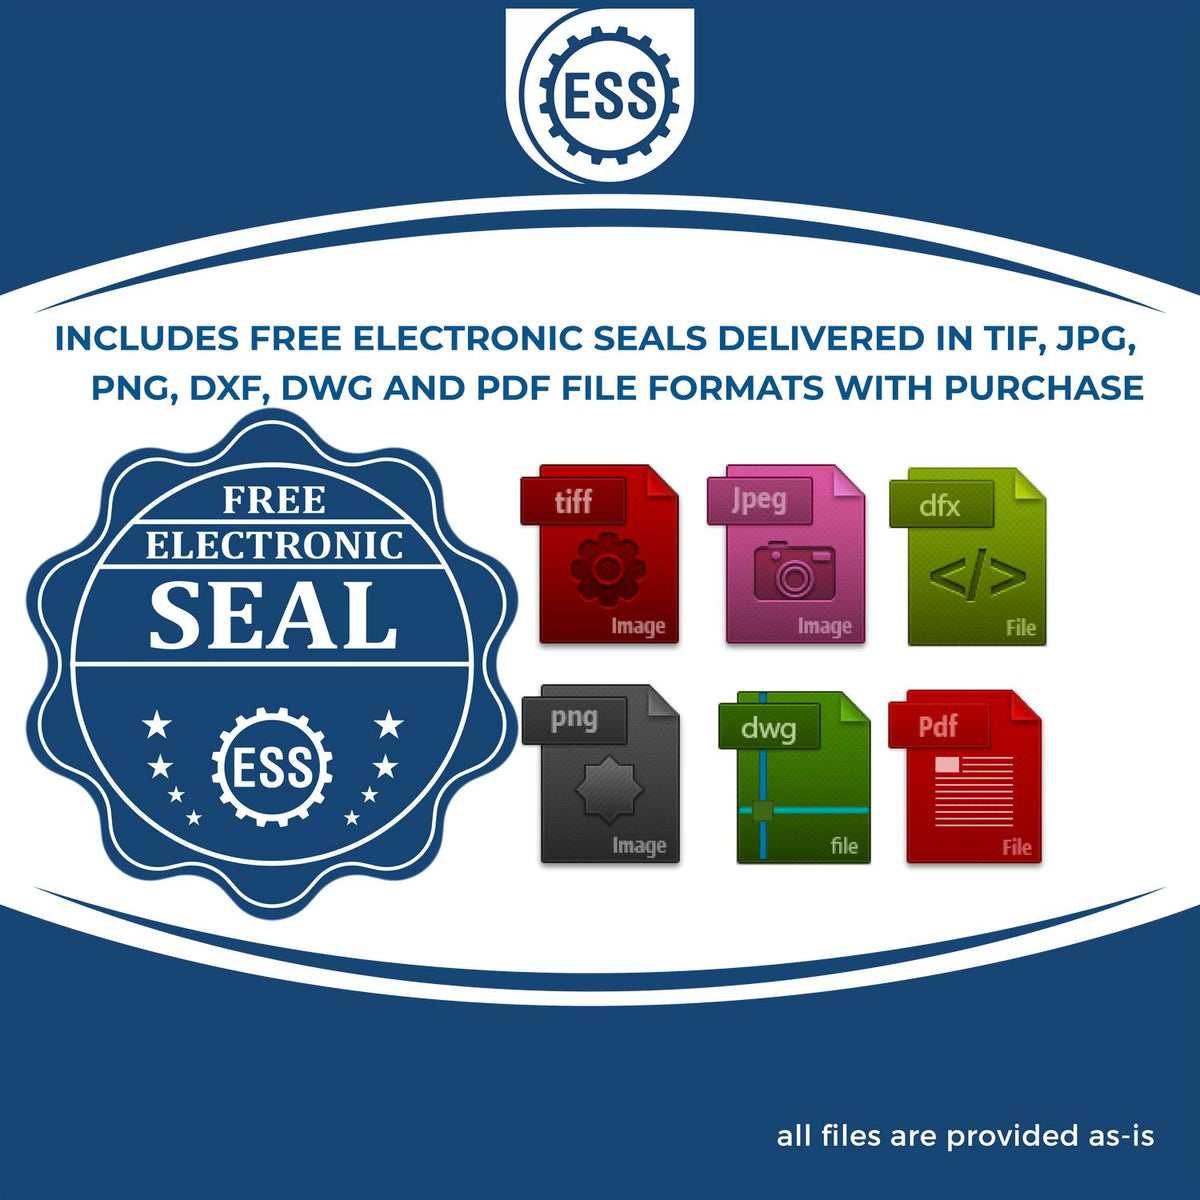 An infographic for the free electronic seal for the Premium MaxLight Pre-Inked Kansas Engineering Stamp illustrating the different file type icons such as DXF, DWG, TIF, JPG and PNG.